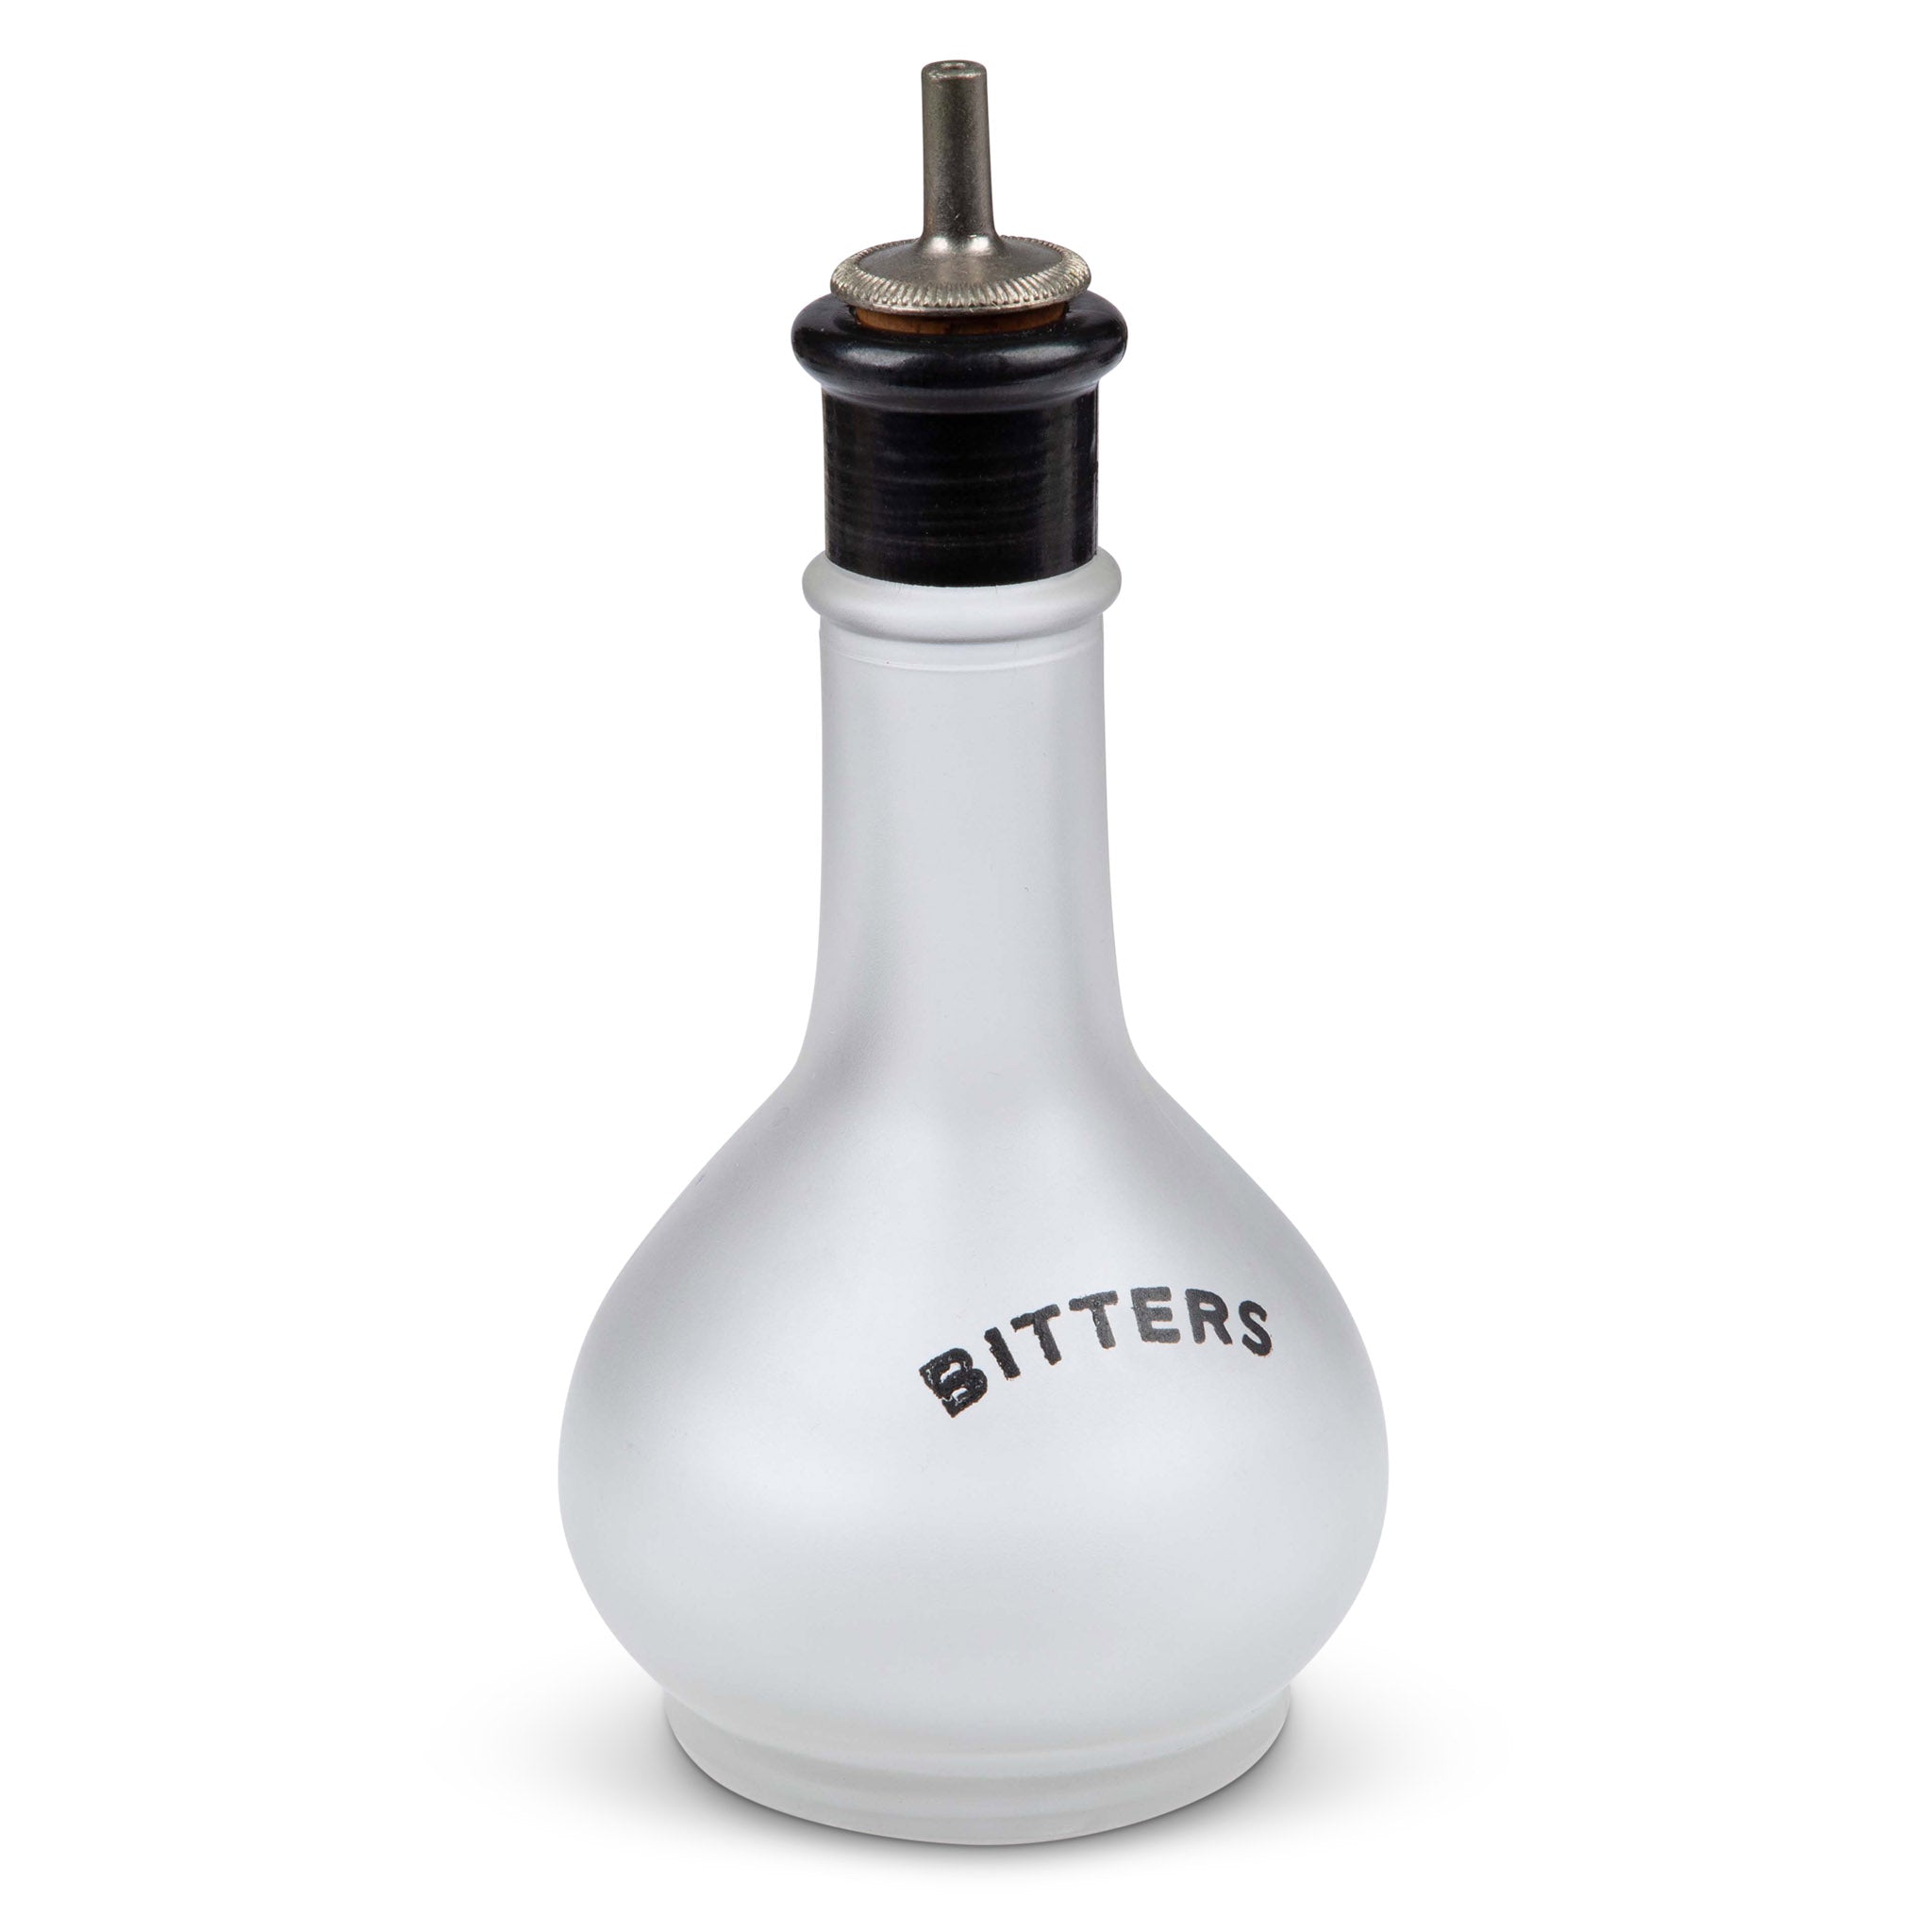 Vintage Frosted Glass Cocktail Bitters Bottle